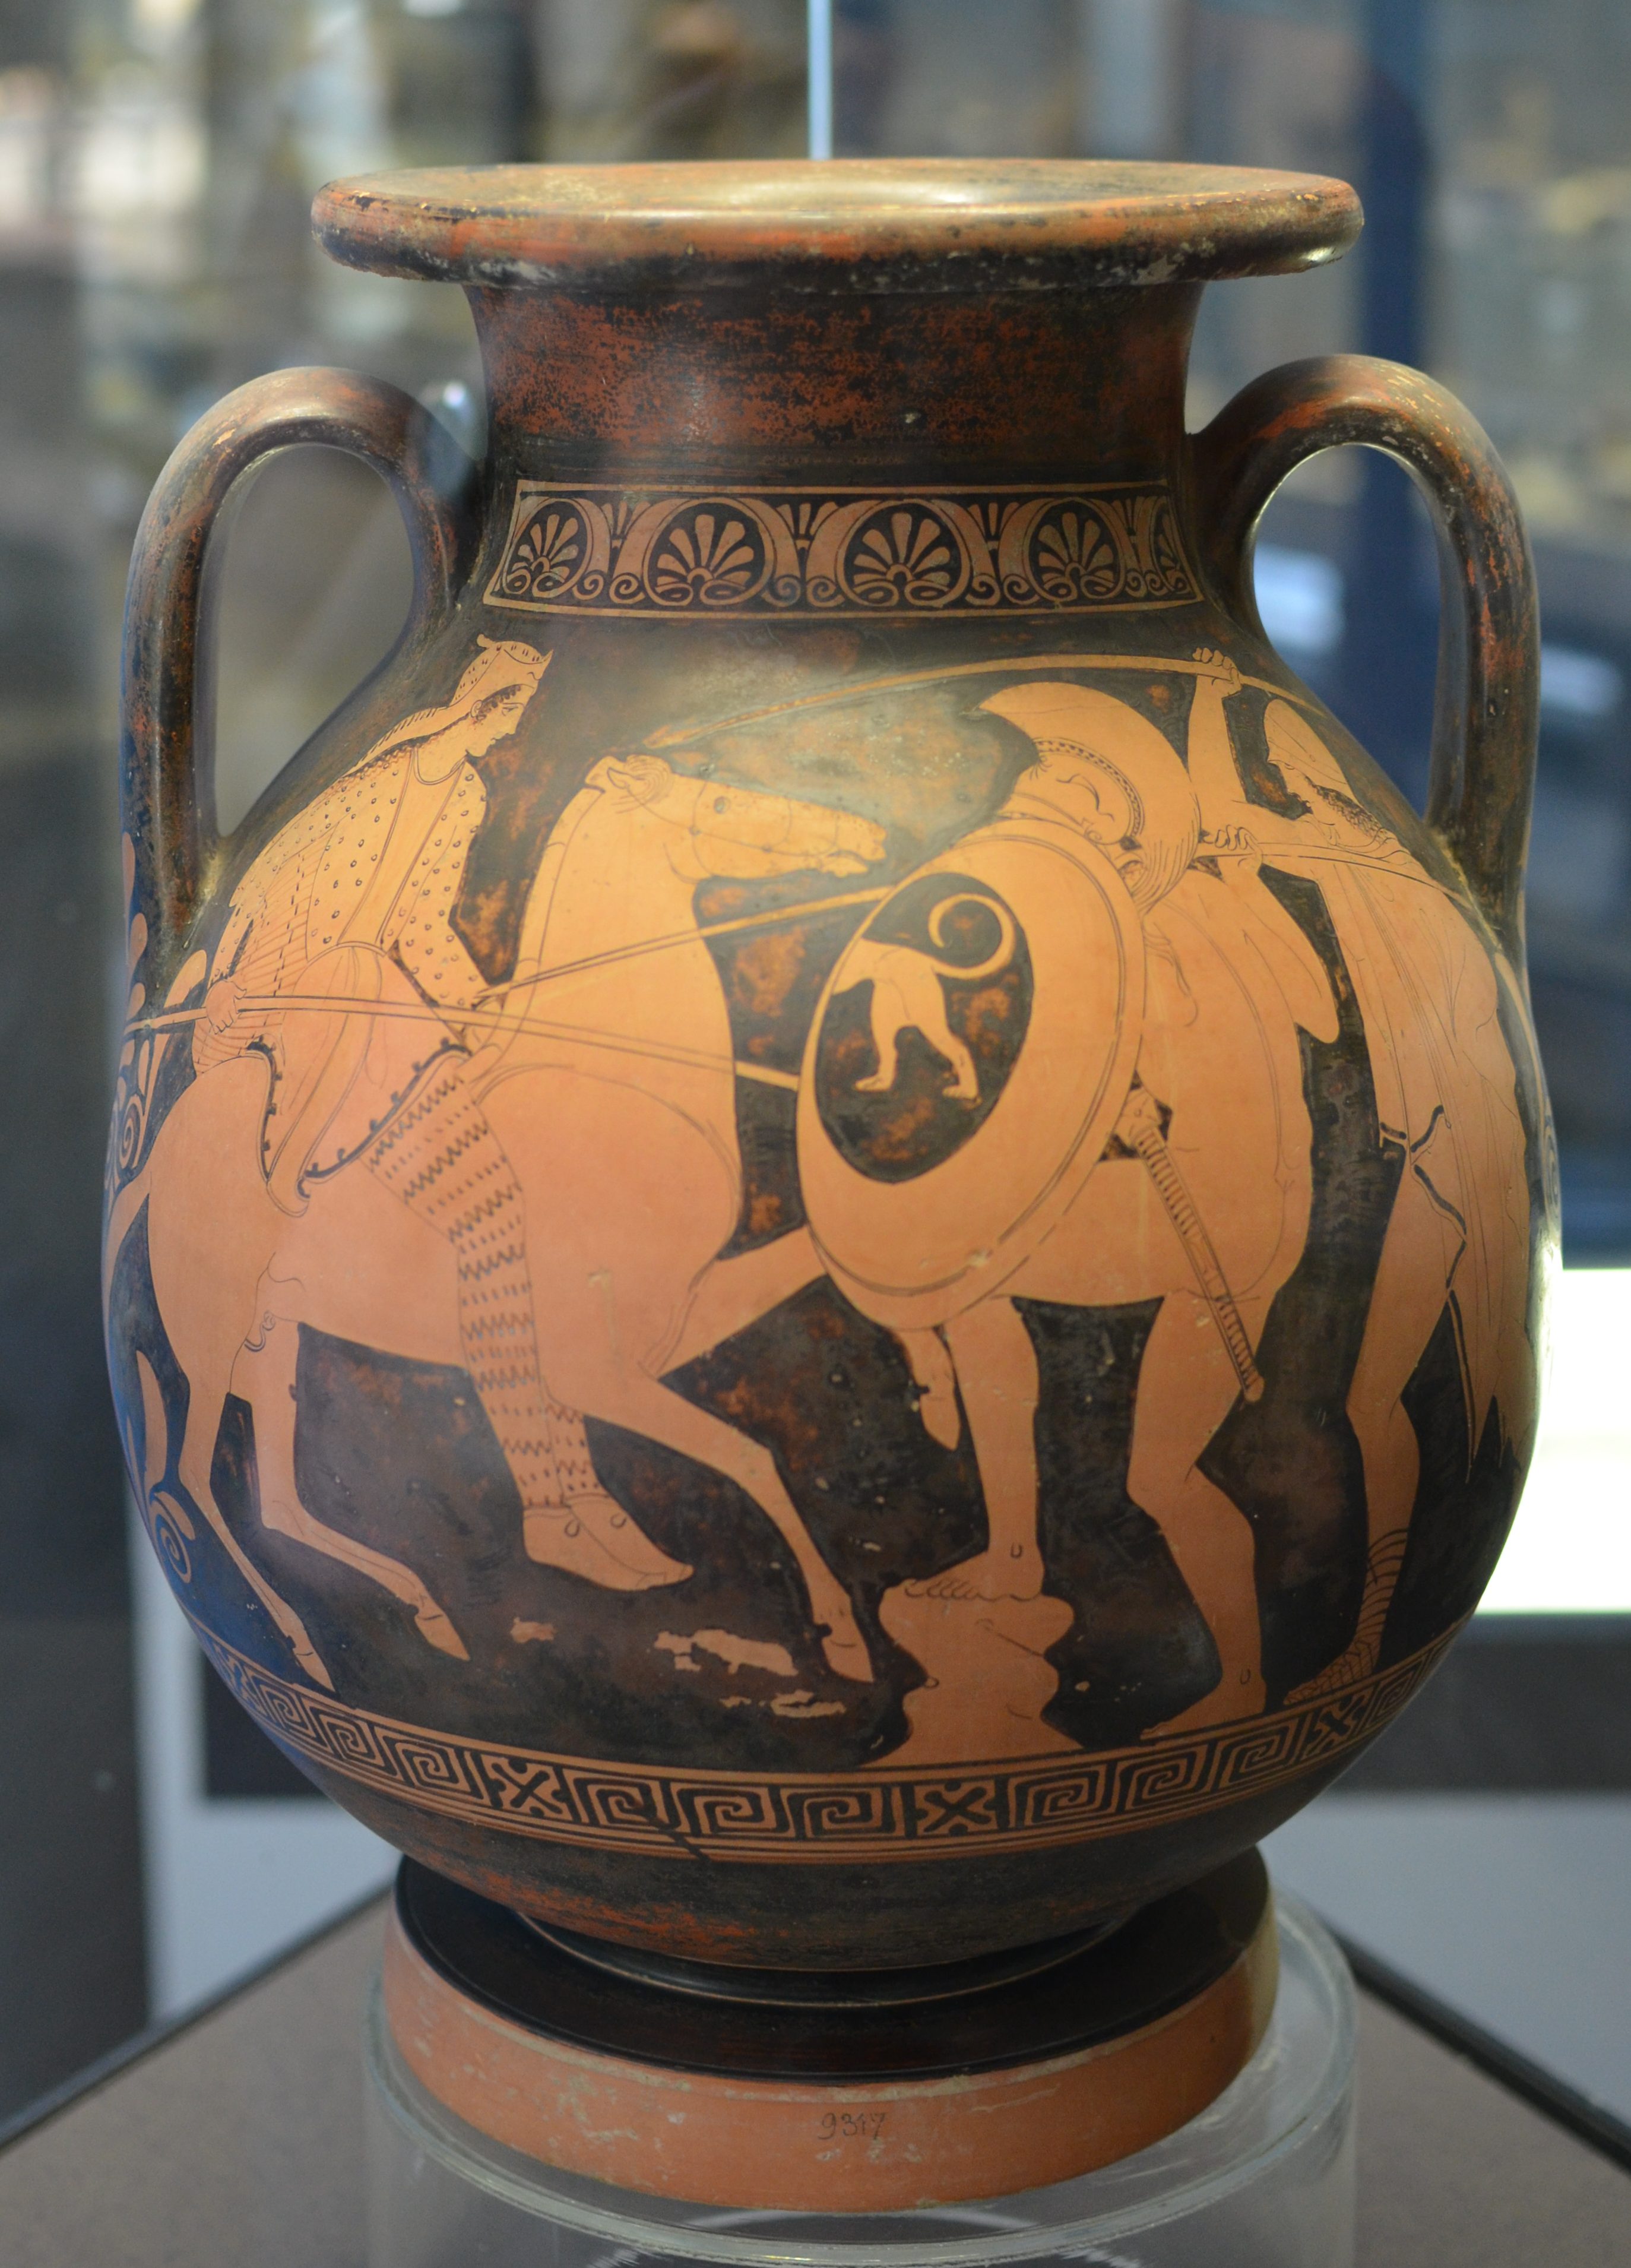 An Amazon, riding a horse, fight a Greek warrior. The Amazon has striped leggings and a hat, and wields a spear. The Greek wield a round shield decorated with a lion, and a spear, and wears a helm.